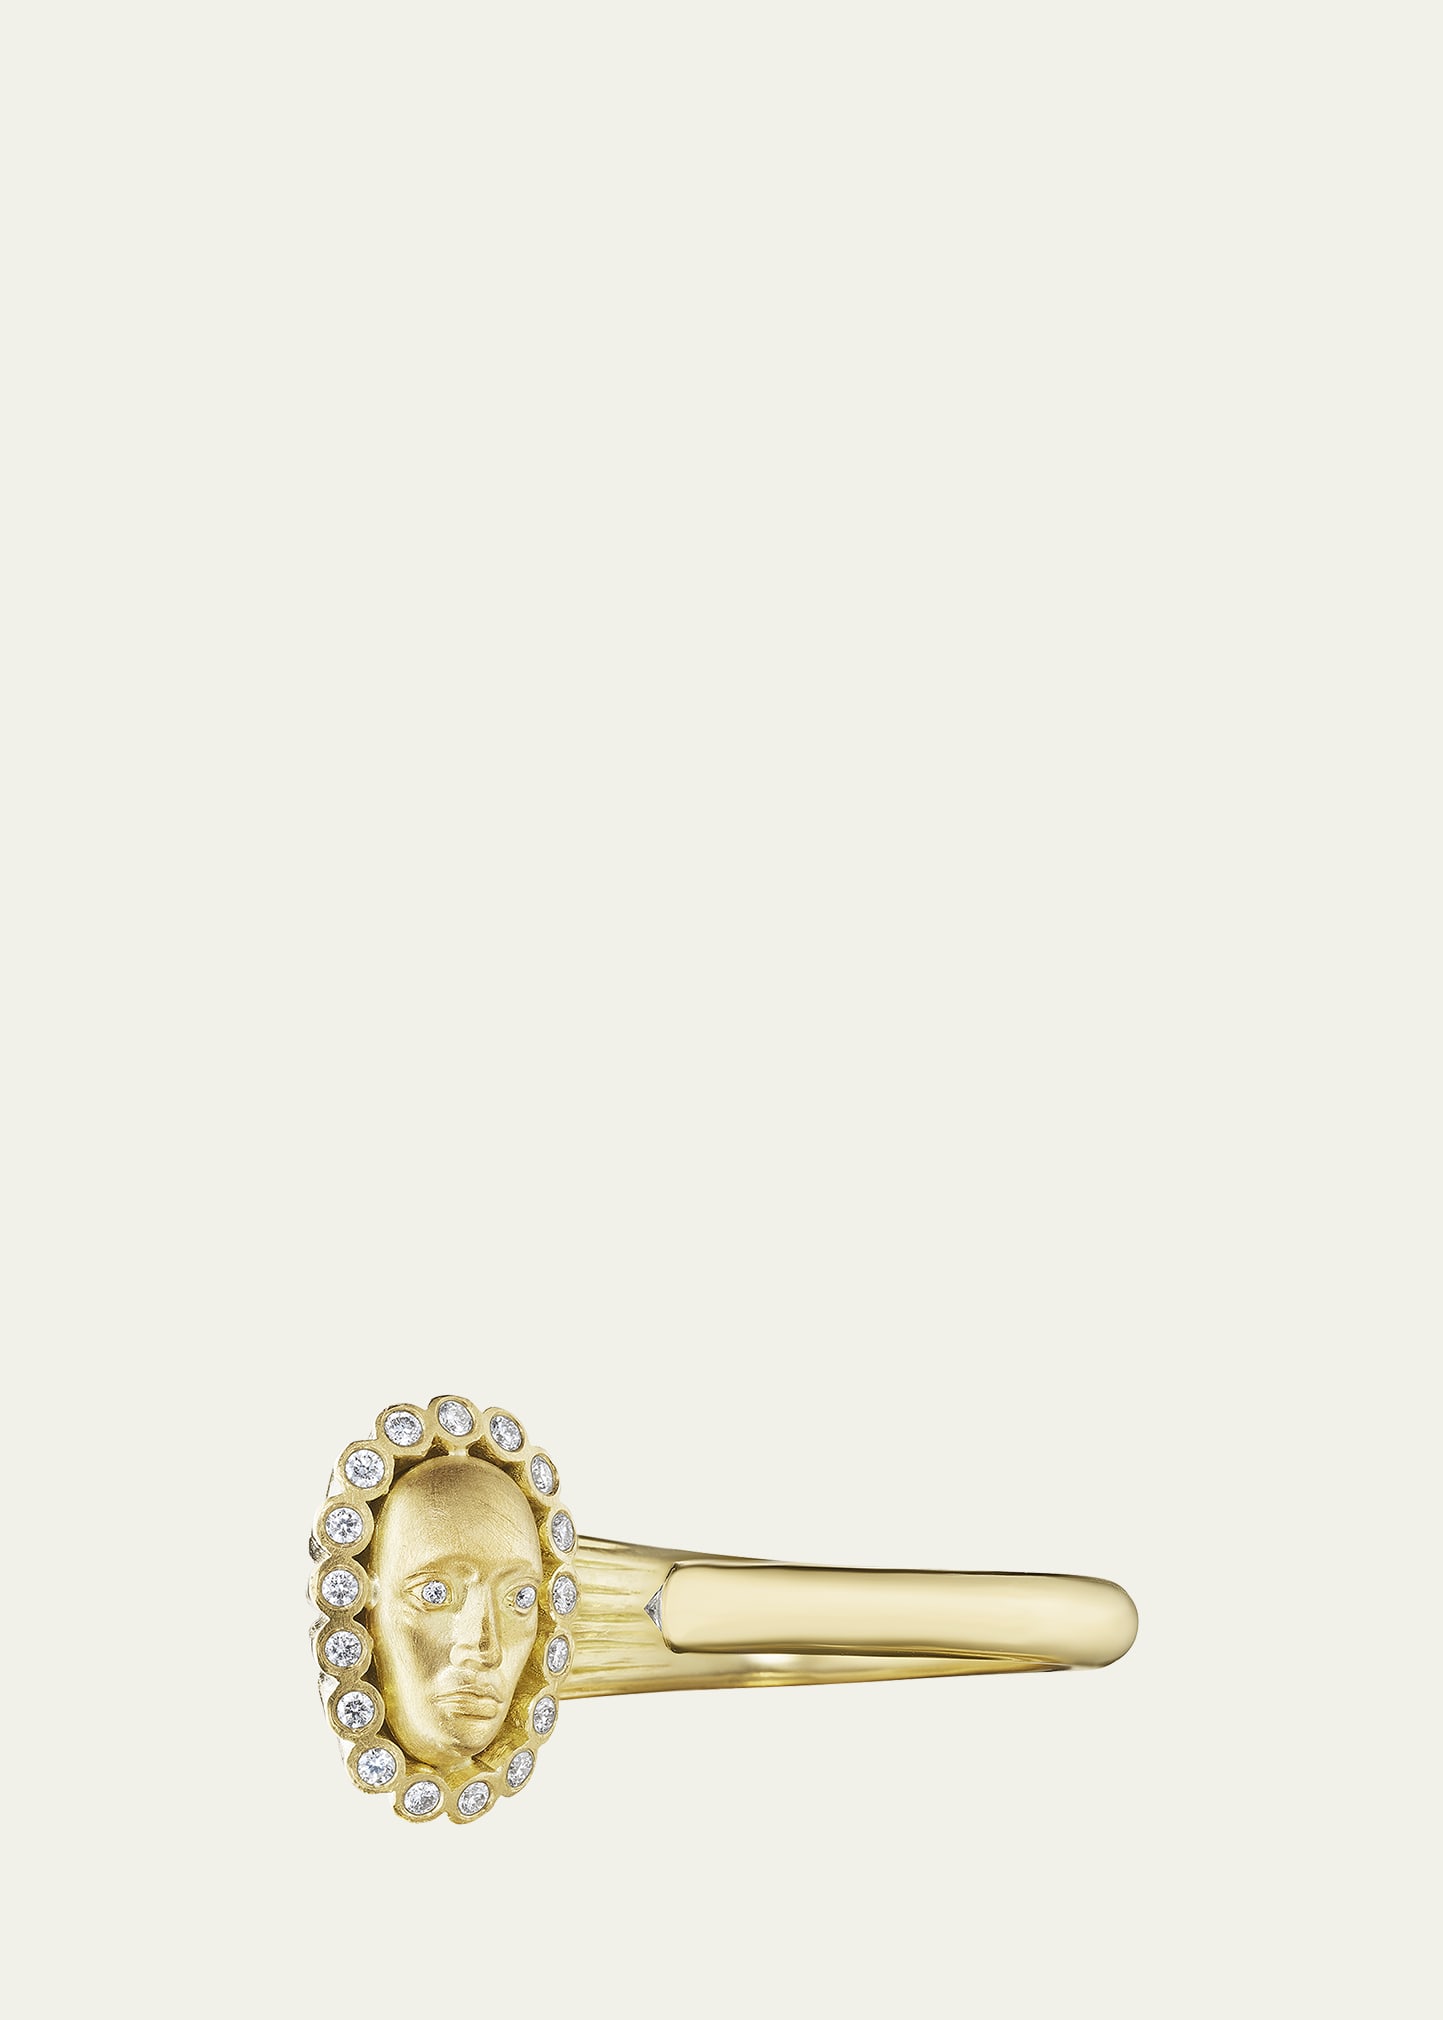 Anthony Lent Vulcana Comet Flower Ring in 18K Gold with Diamonds